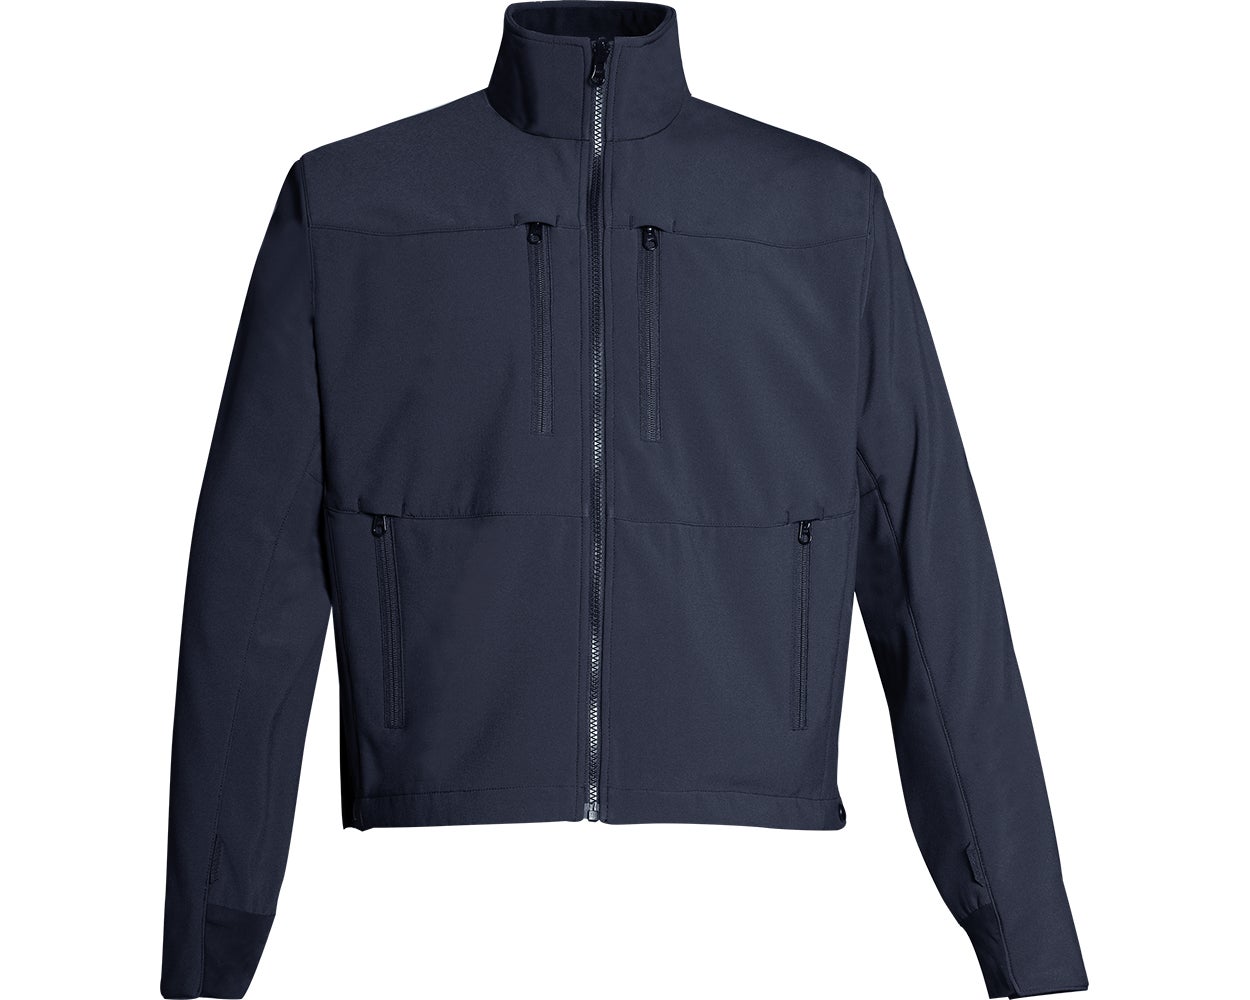 Flying Cross Softshell Layertech Jacket 54100A - Clothing & Accessories